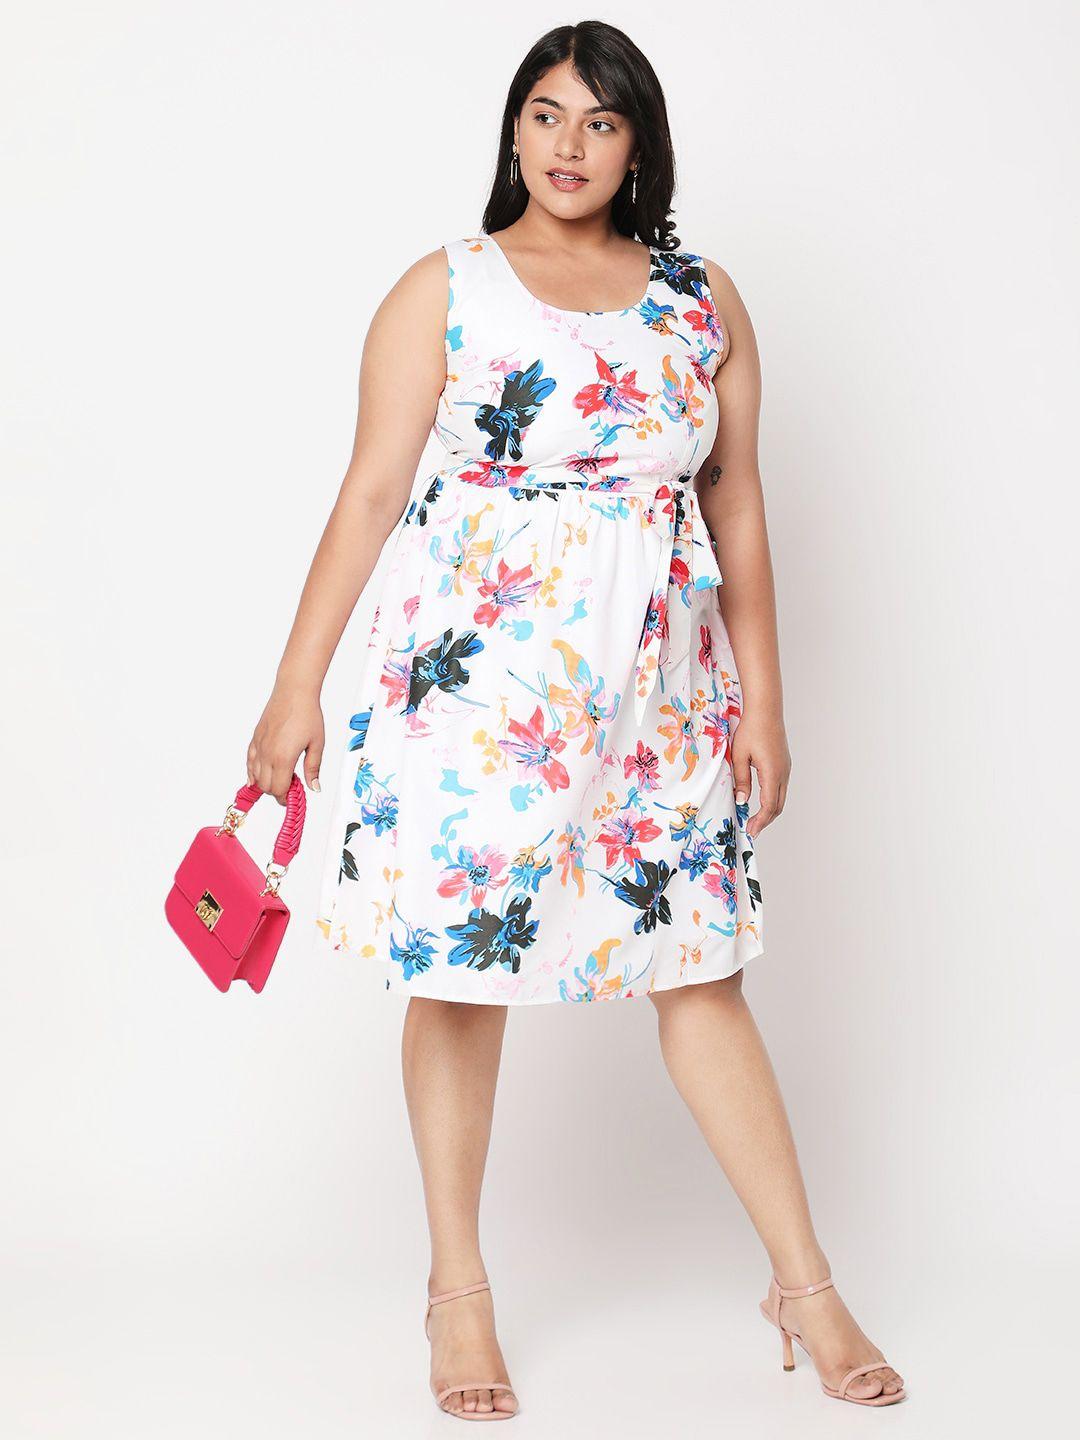 curves by mish white plus size floral printed dress